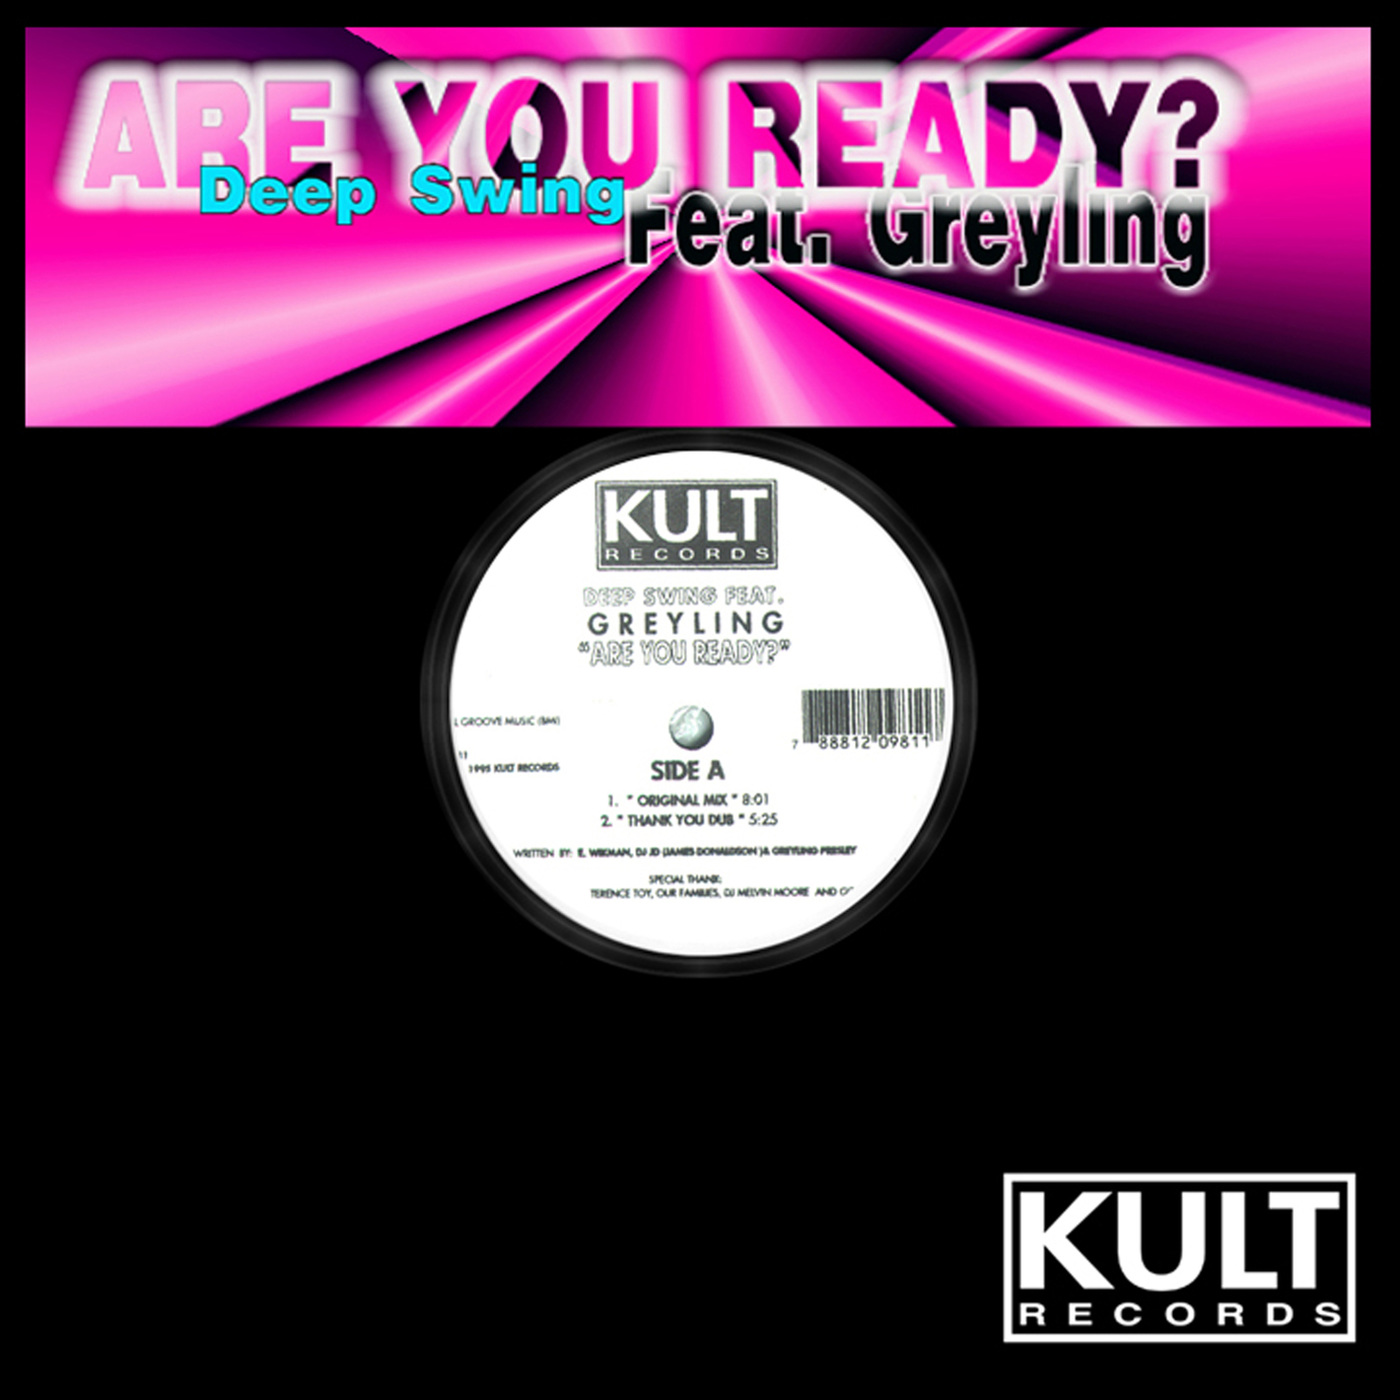 Deep Swing ft Greyling Presley - Kult Records Presents: Are You Ready? (Remastered) / KULT old skool